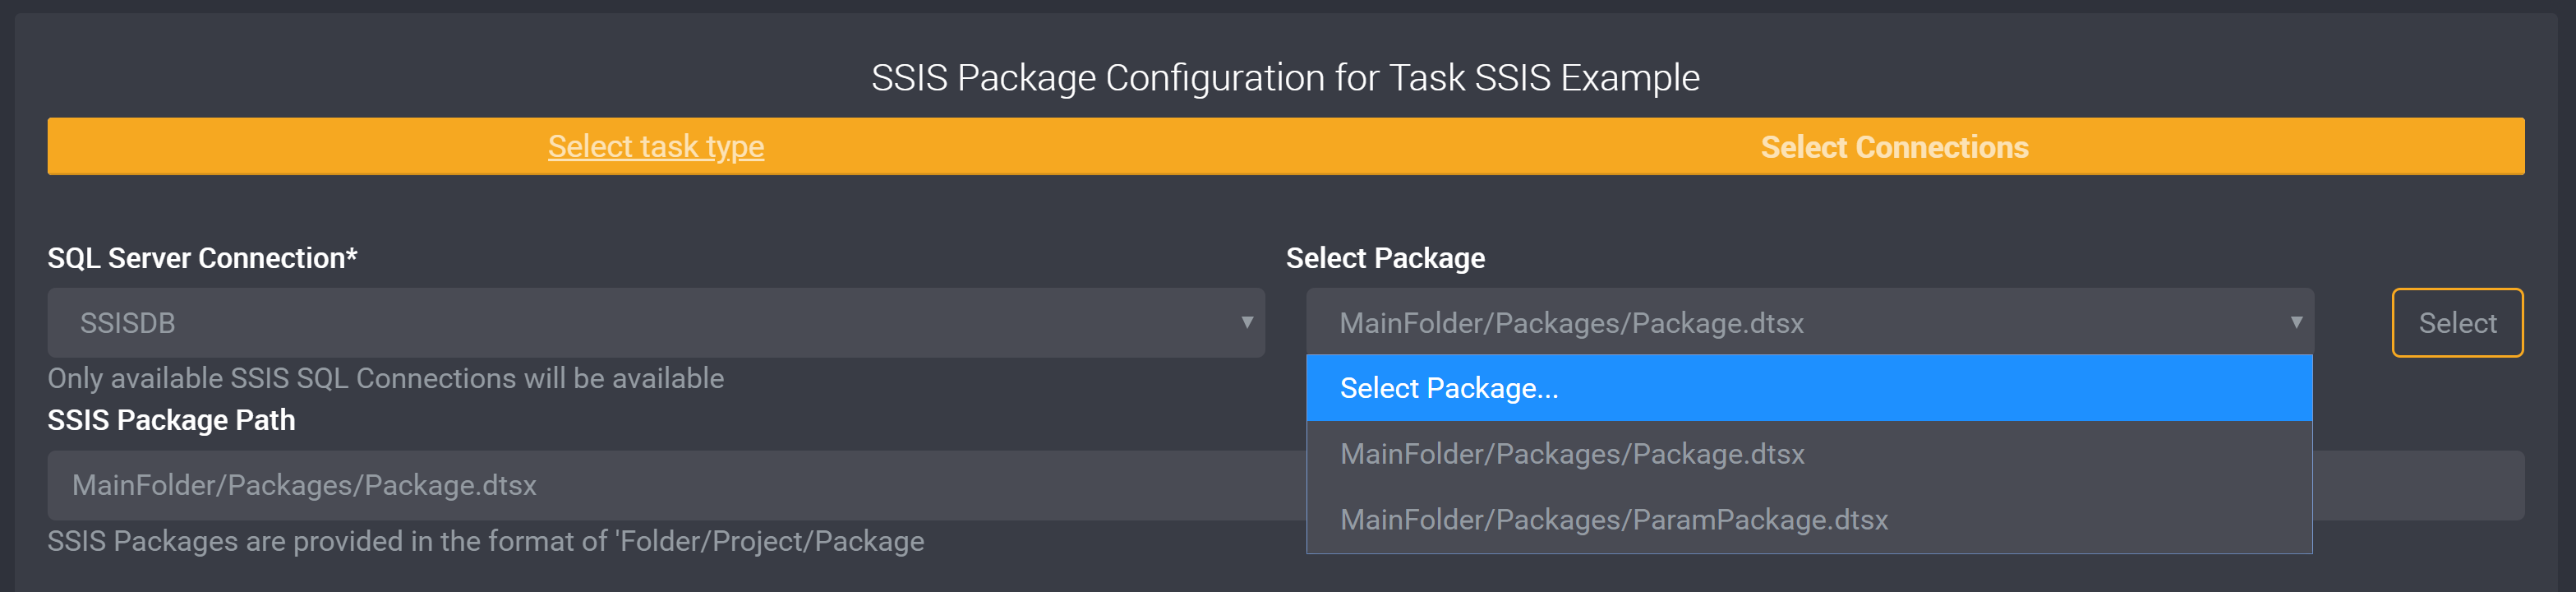 Select SSIS Package